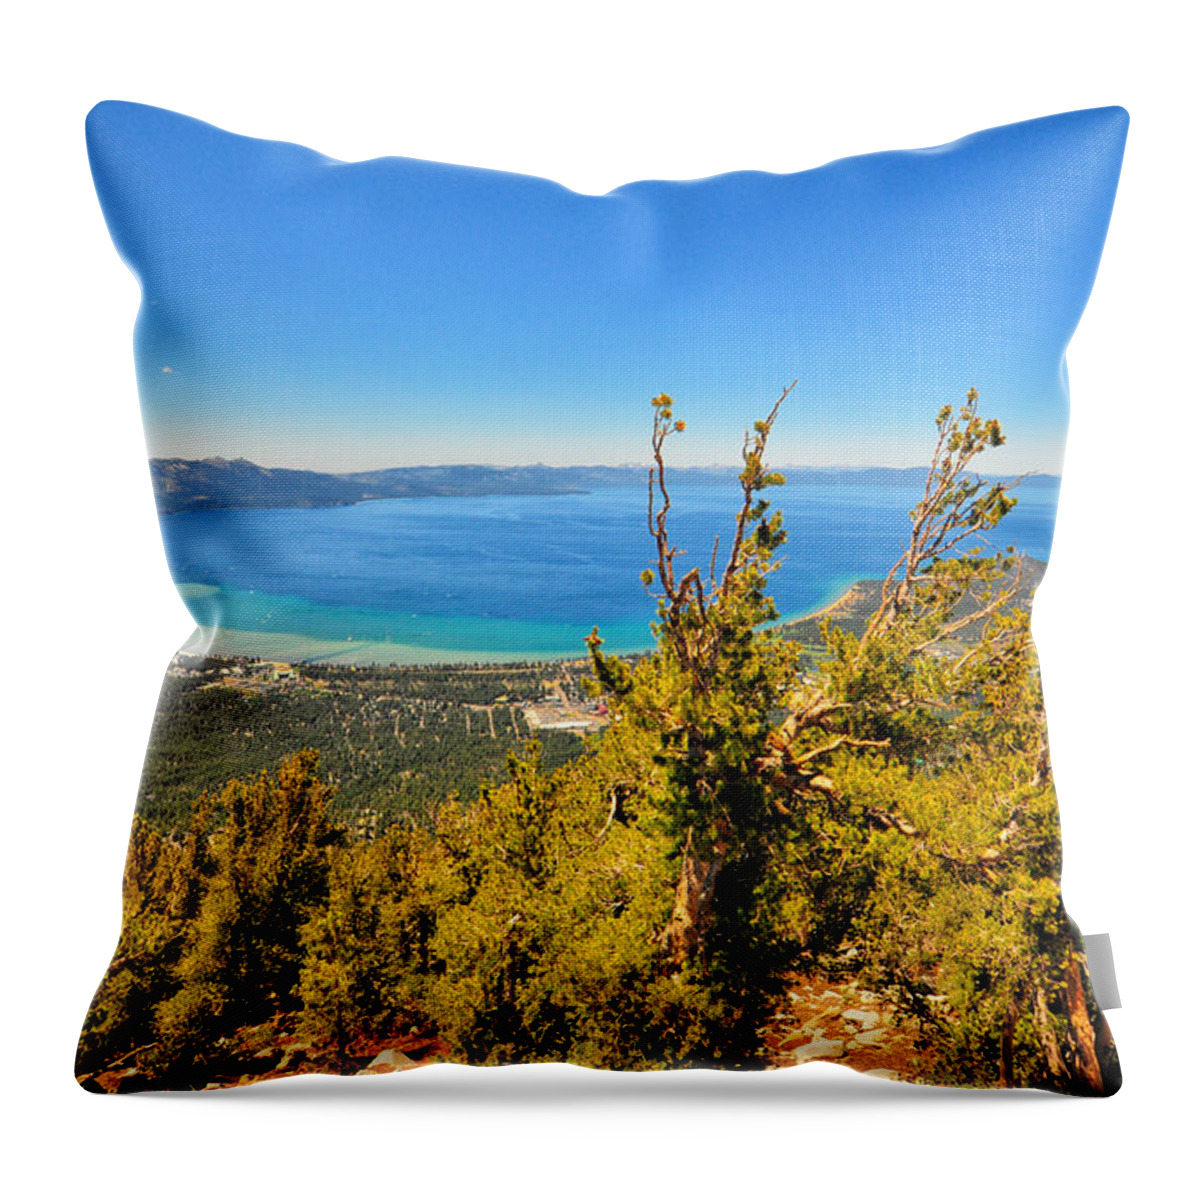 Lake Tahoe Throw Pillow featuring the photograph Lake Tahoe Overlook - South Lake Tahoe - California by Bruce Friedman